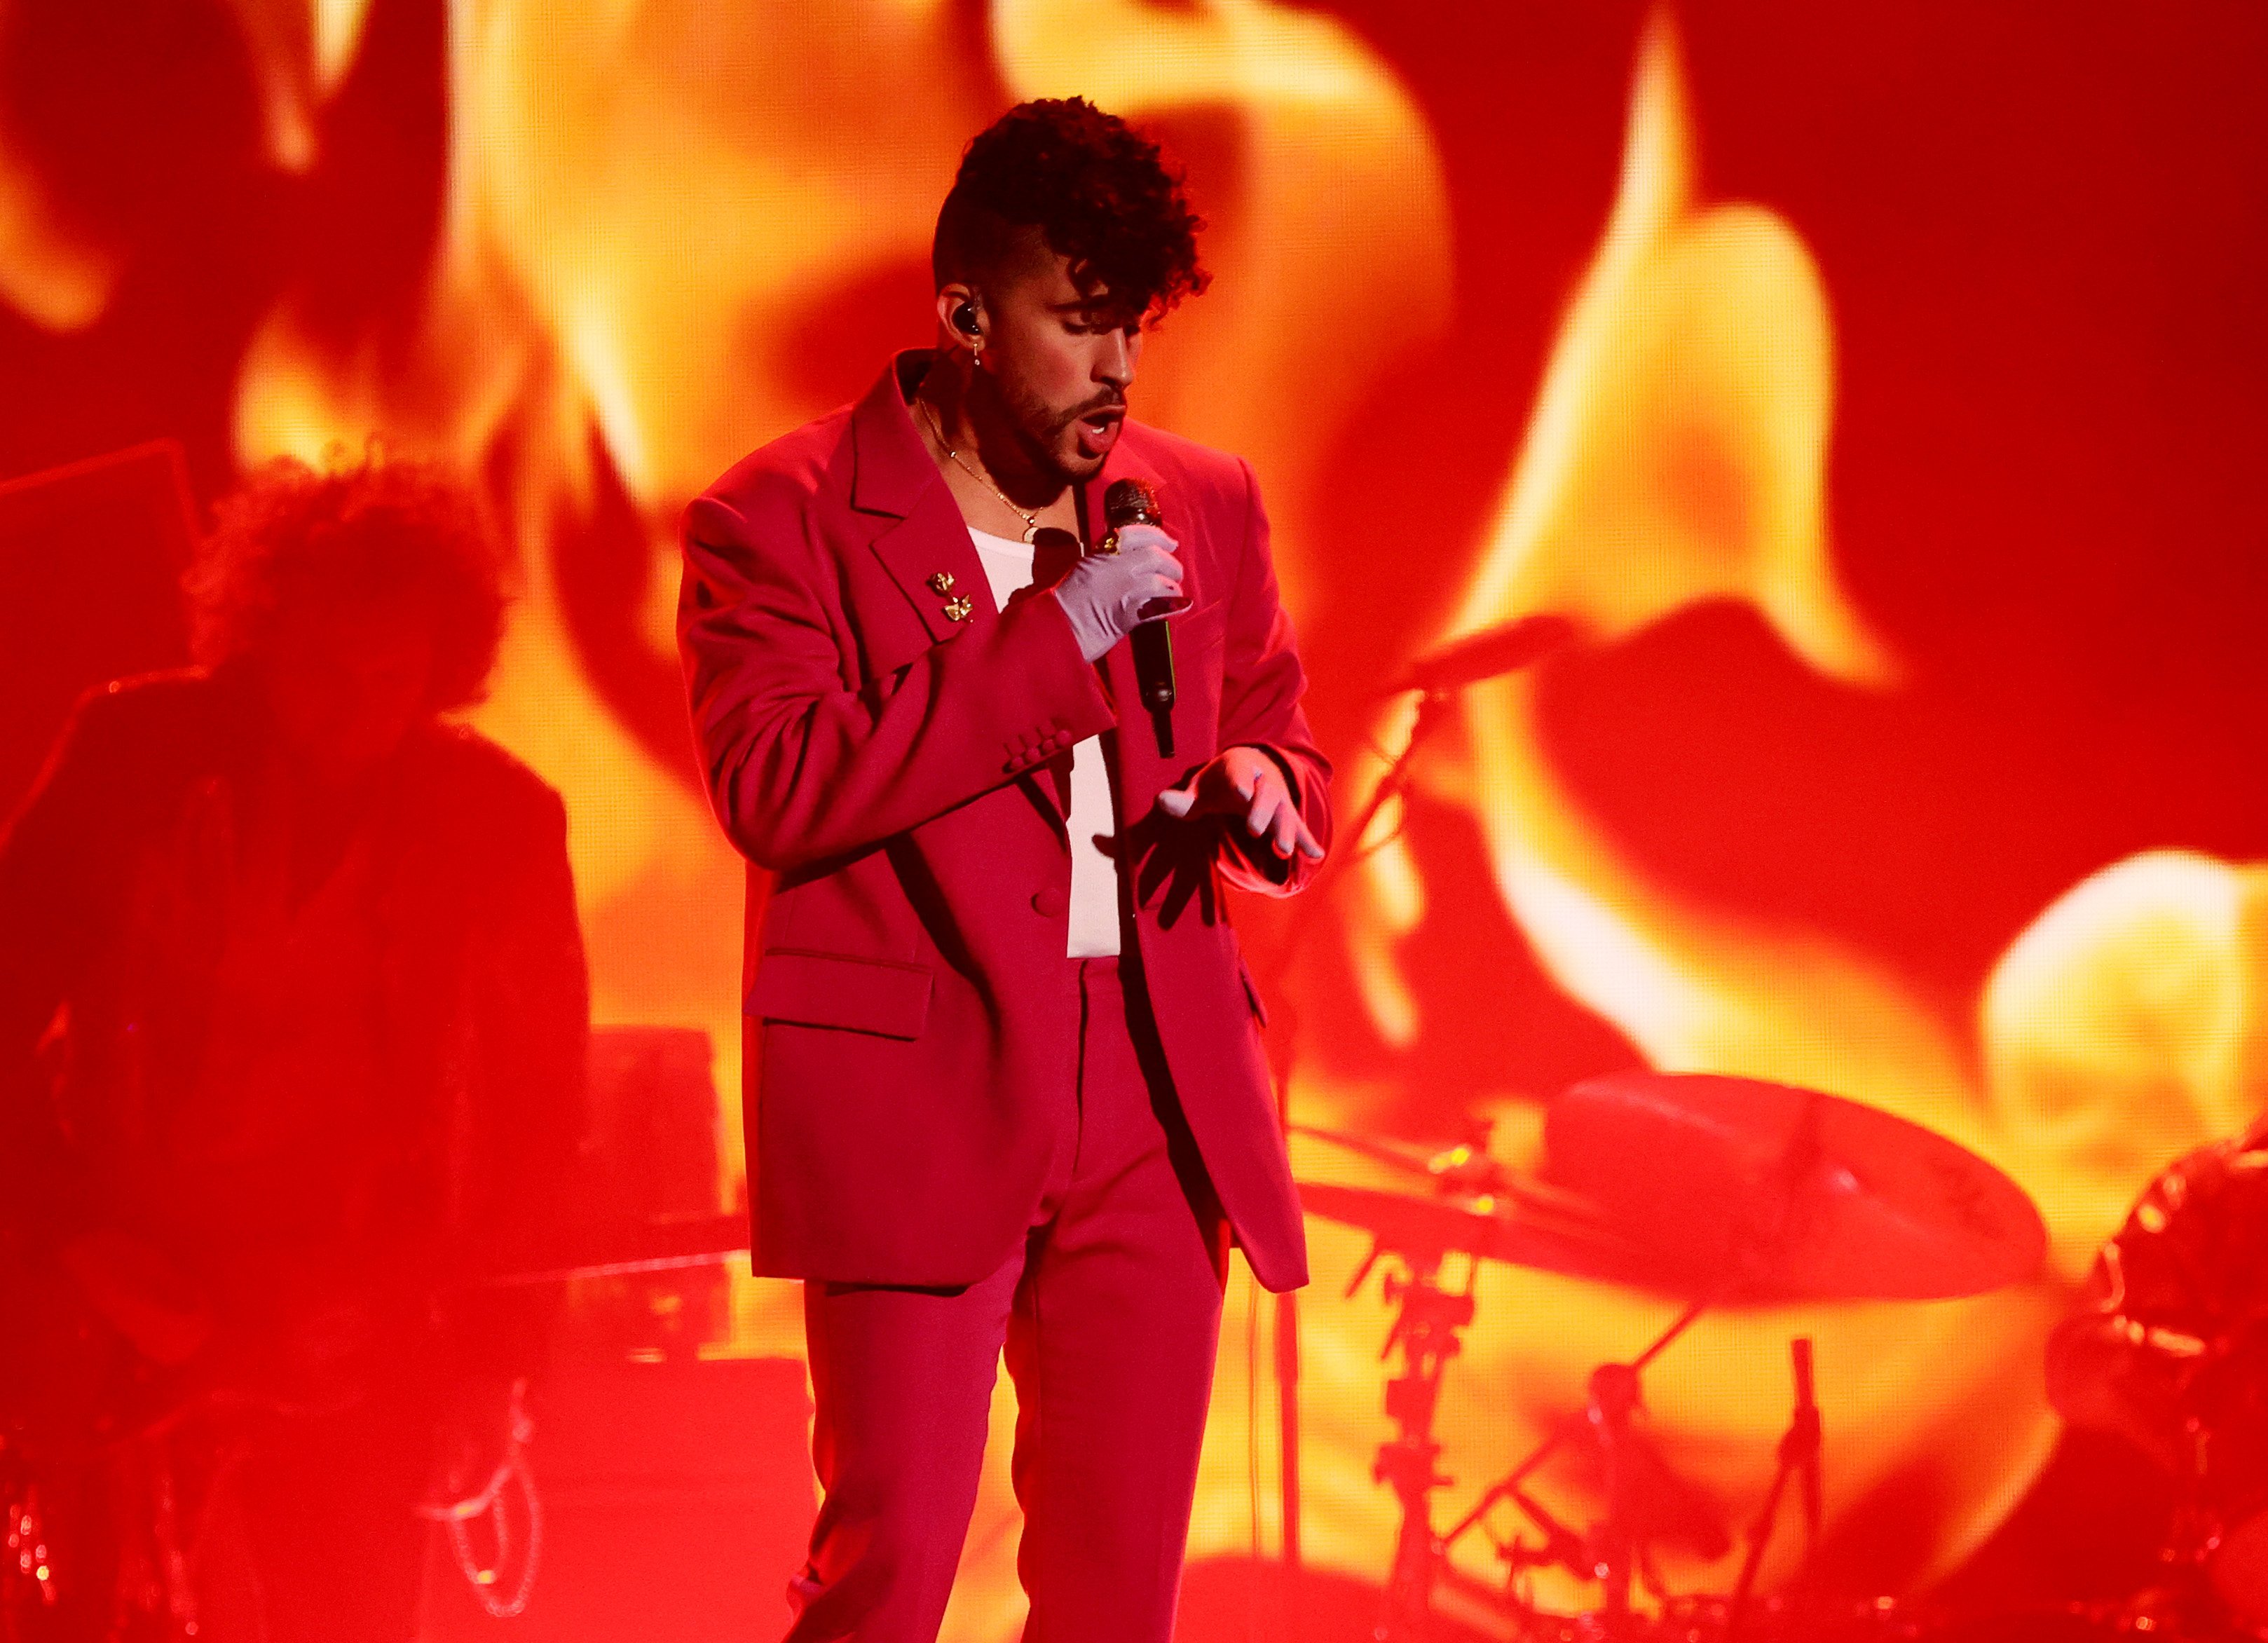 Bad Bunny performs in a red suit at the Latin Grammys.